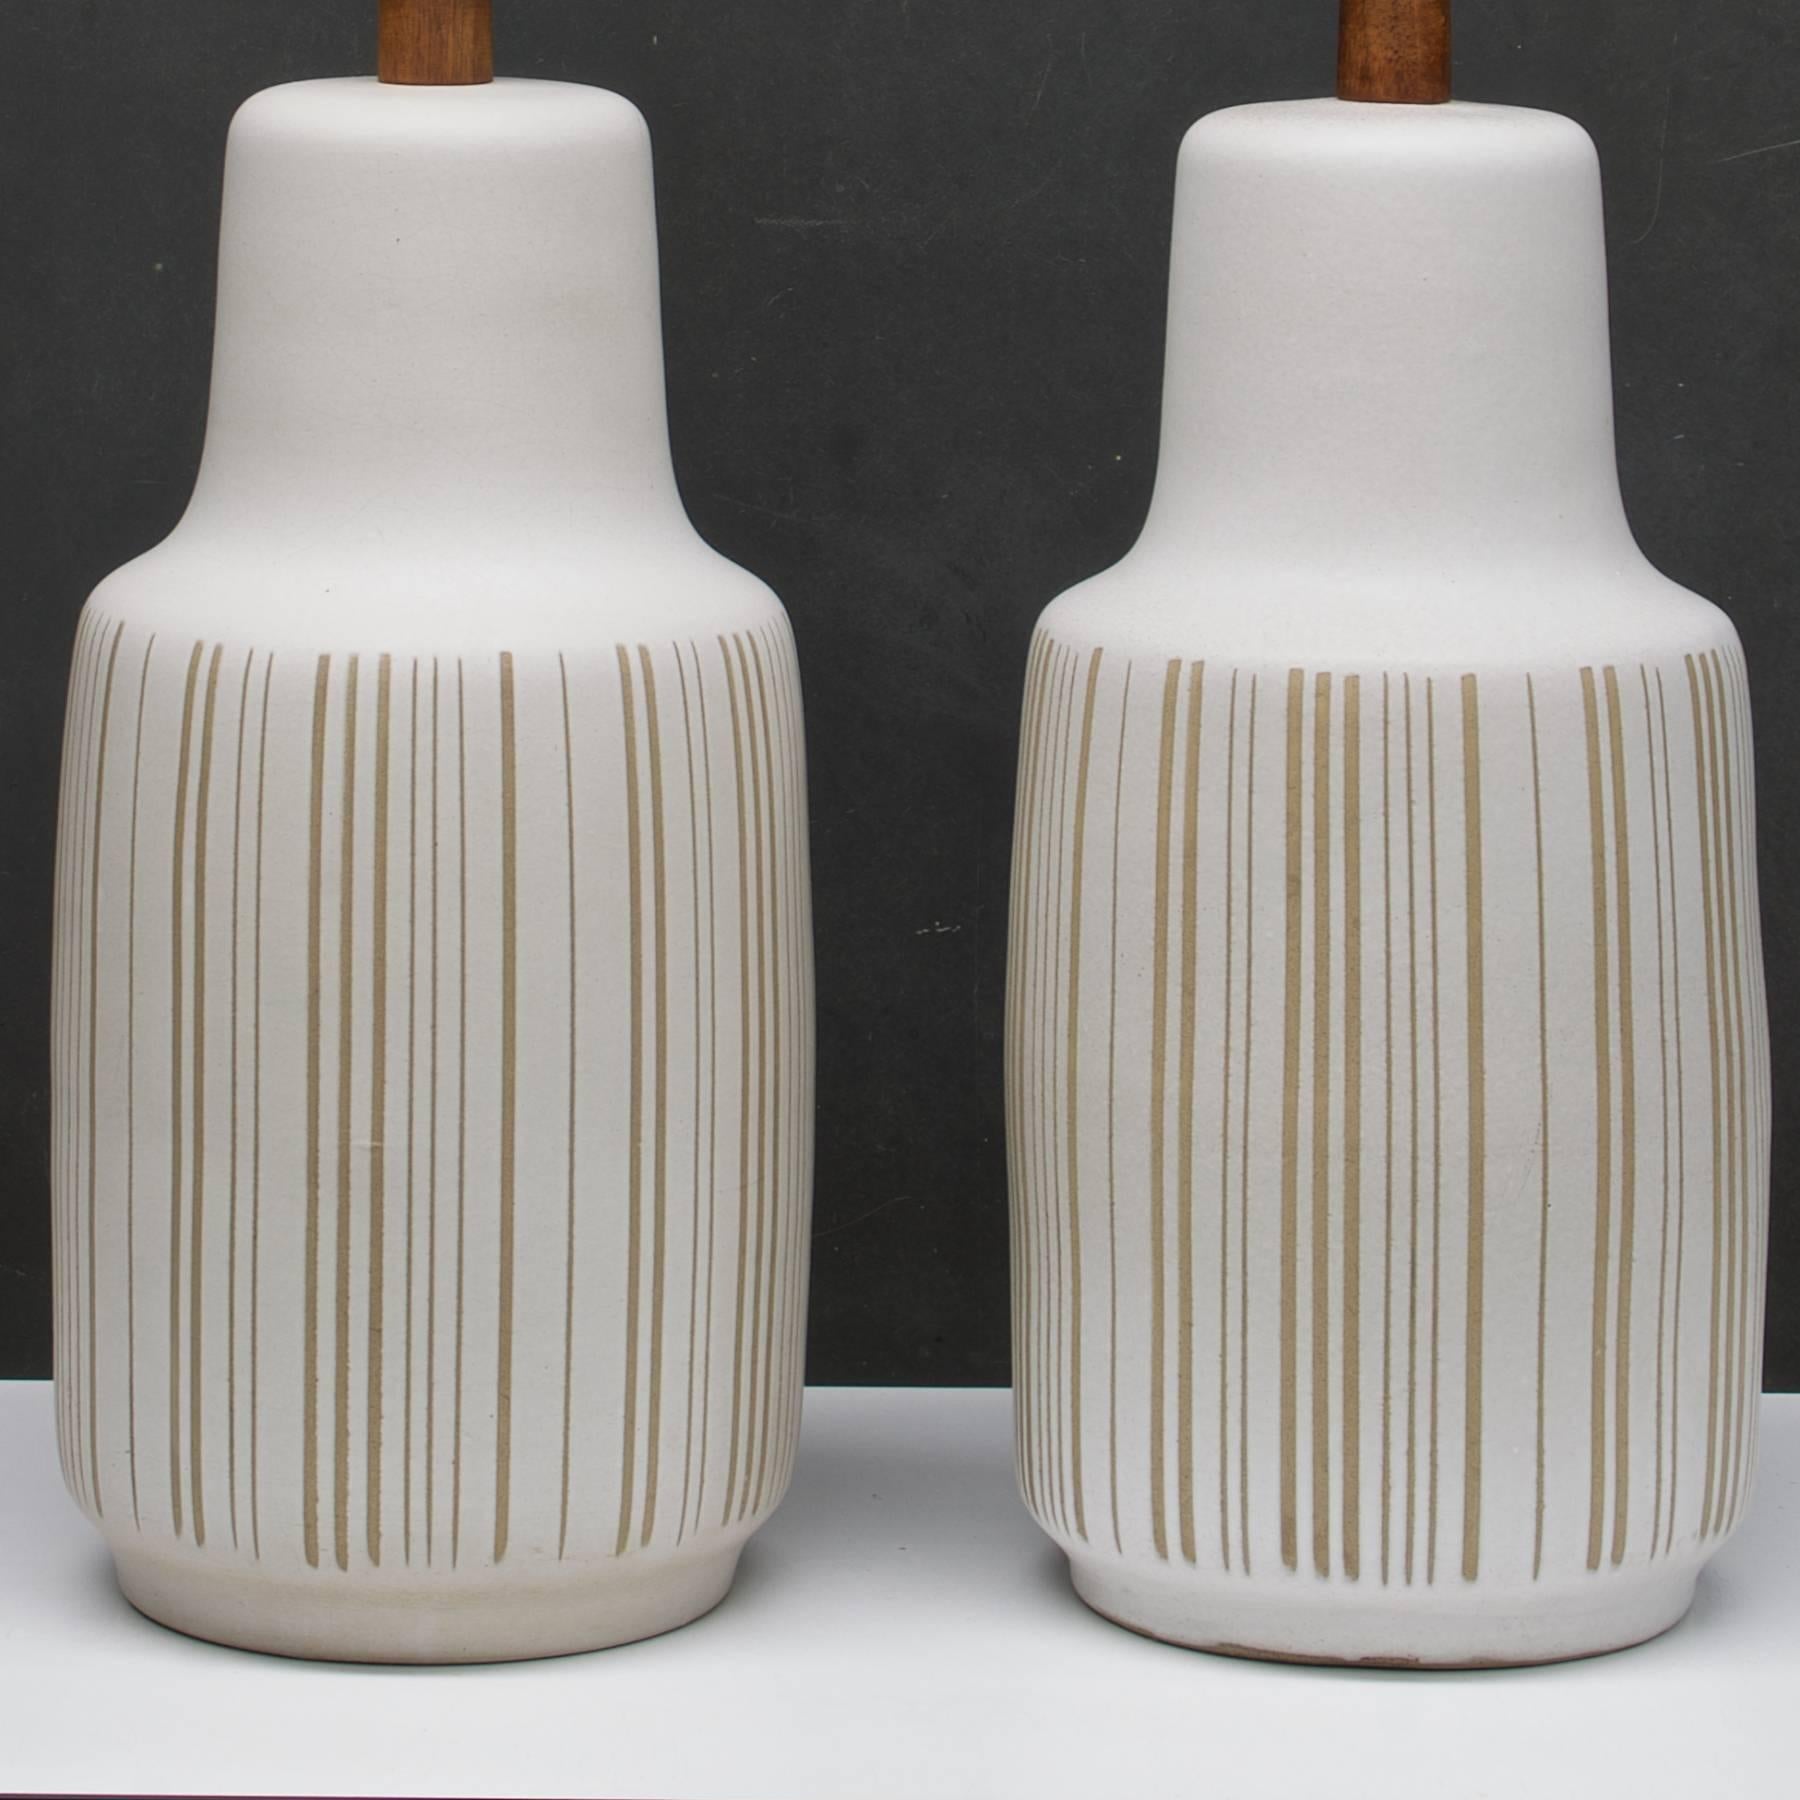 Matte glaze lamps bodies with incised variable width vertical stripes. Both with original finials.